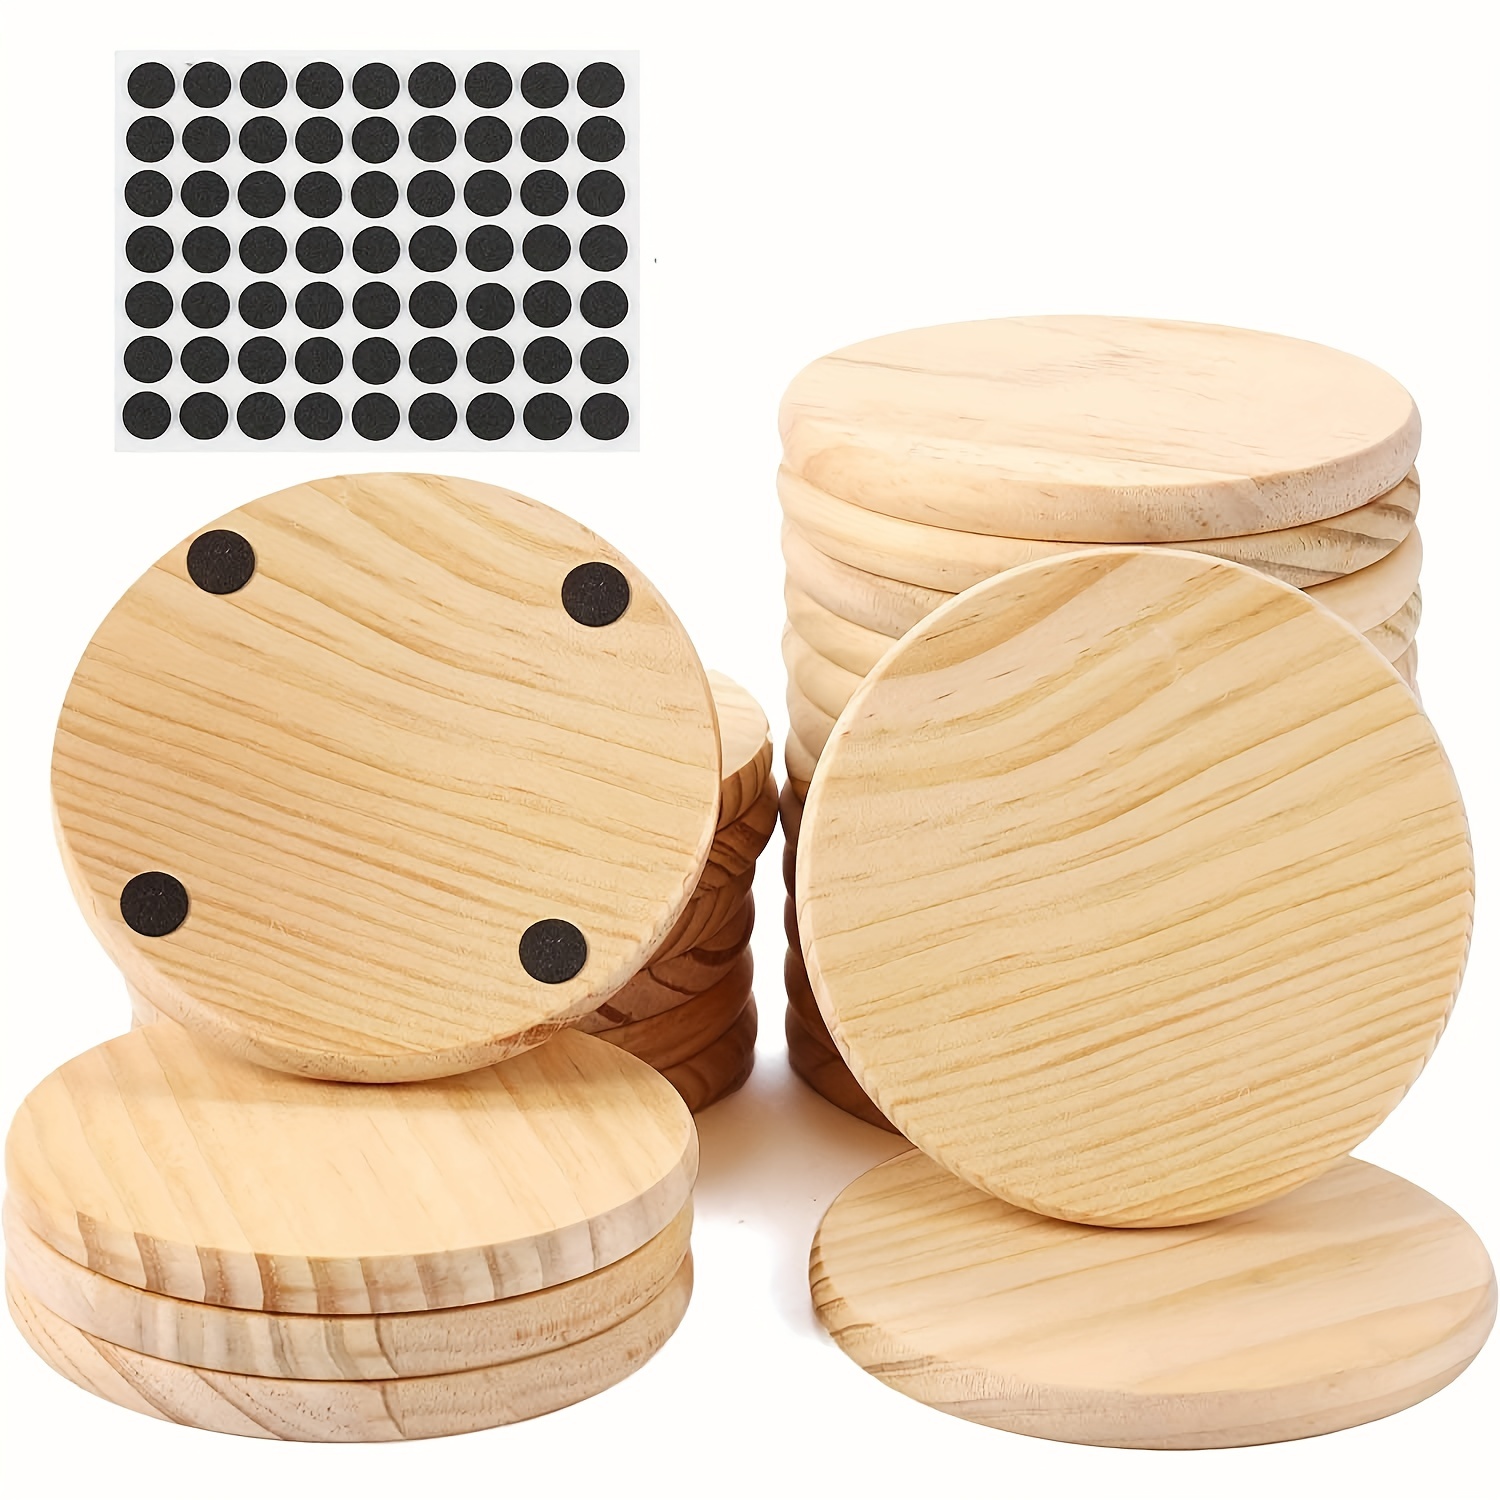  12 Pack Unfinished Wooden Coasters, Blank Wood Crafts